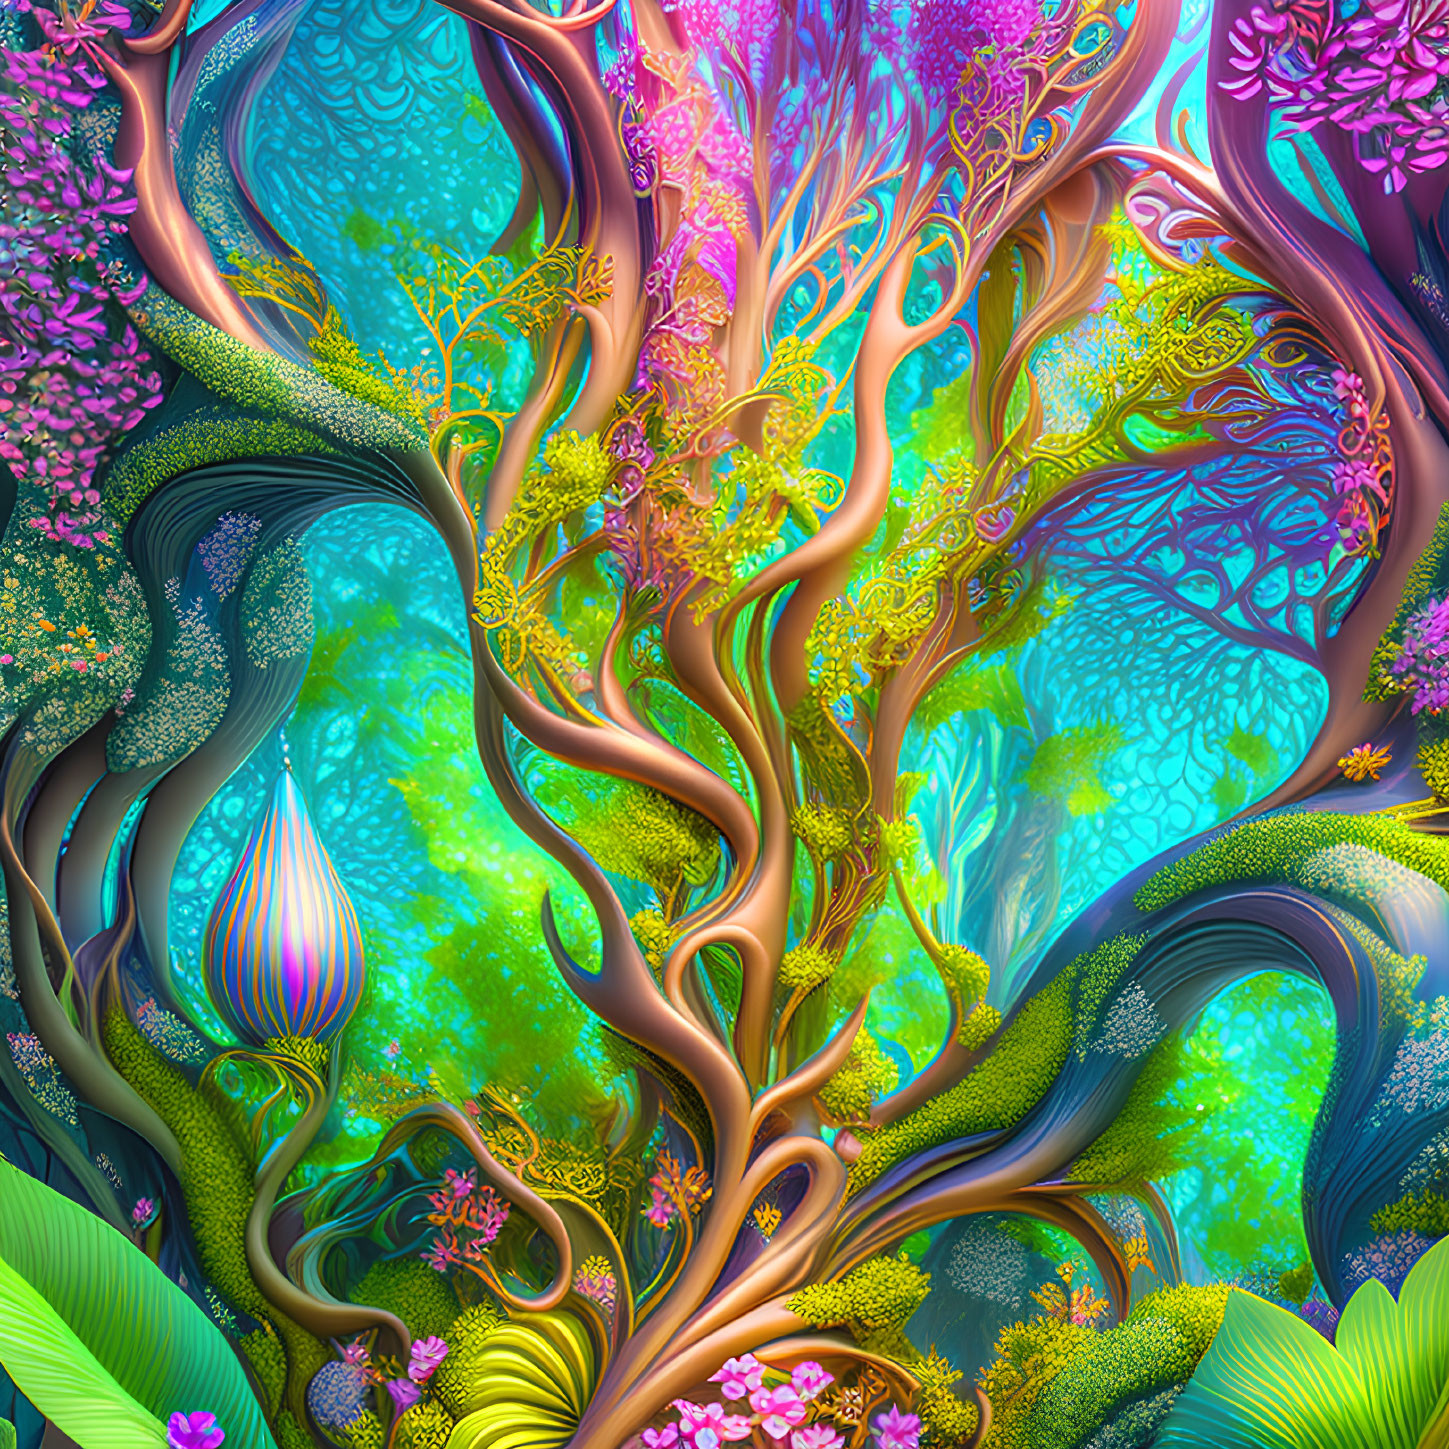 Colorful surreal forest artwork with intricate trees and lush foliage